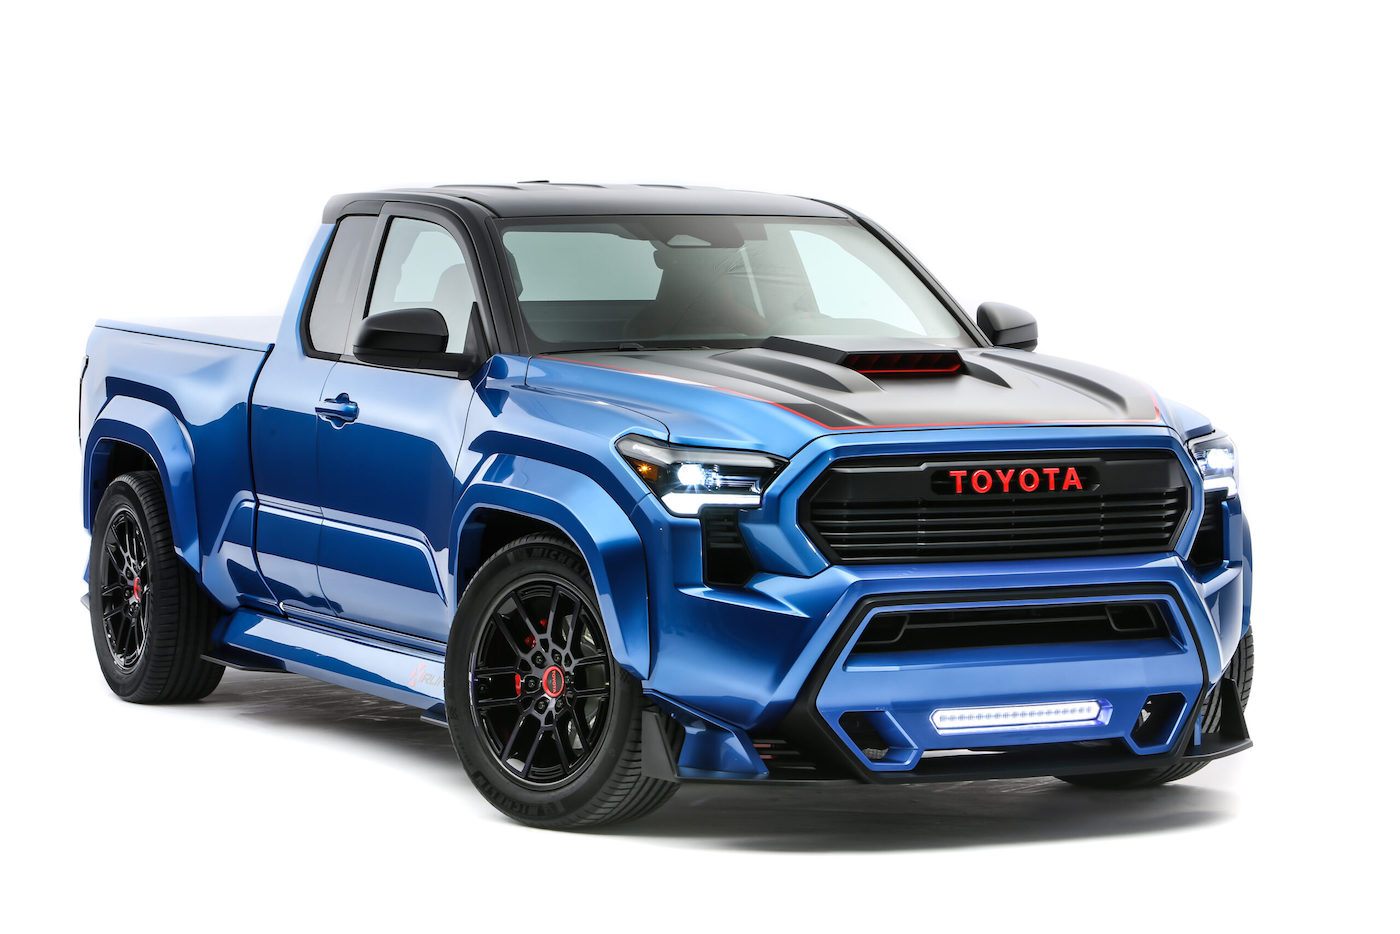 2024 Tacoma 2024 Tacoma X-Runner Concept Envisions Sport Truck with TRD Performance Package Upgrades Tacoma_X_Runner_Concept_Toyota_SEMA_2023_Hi-Res_Hero-scaled